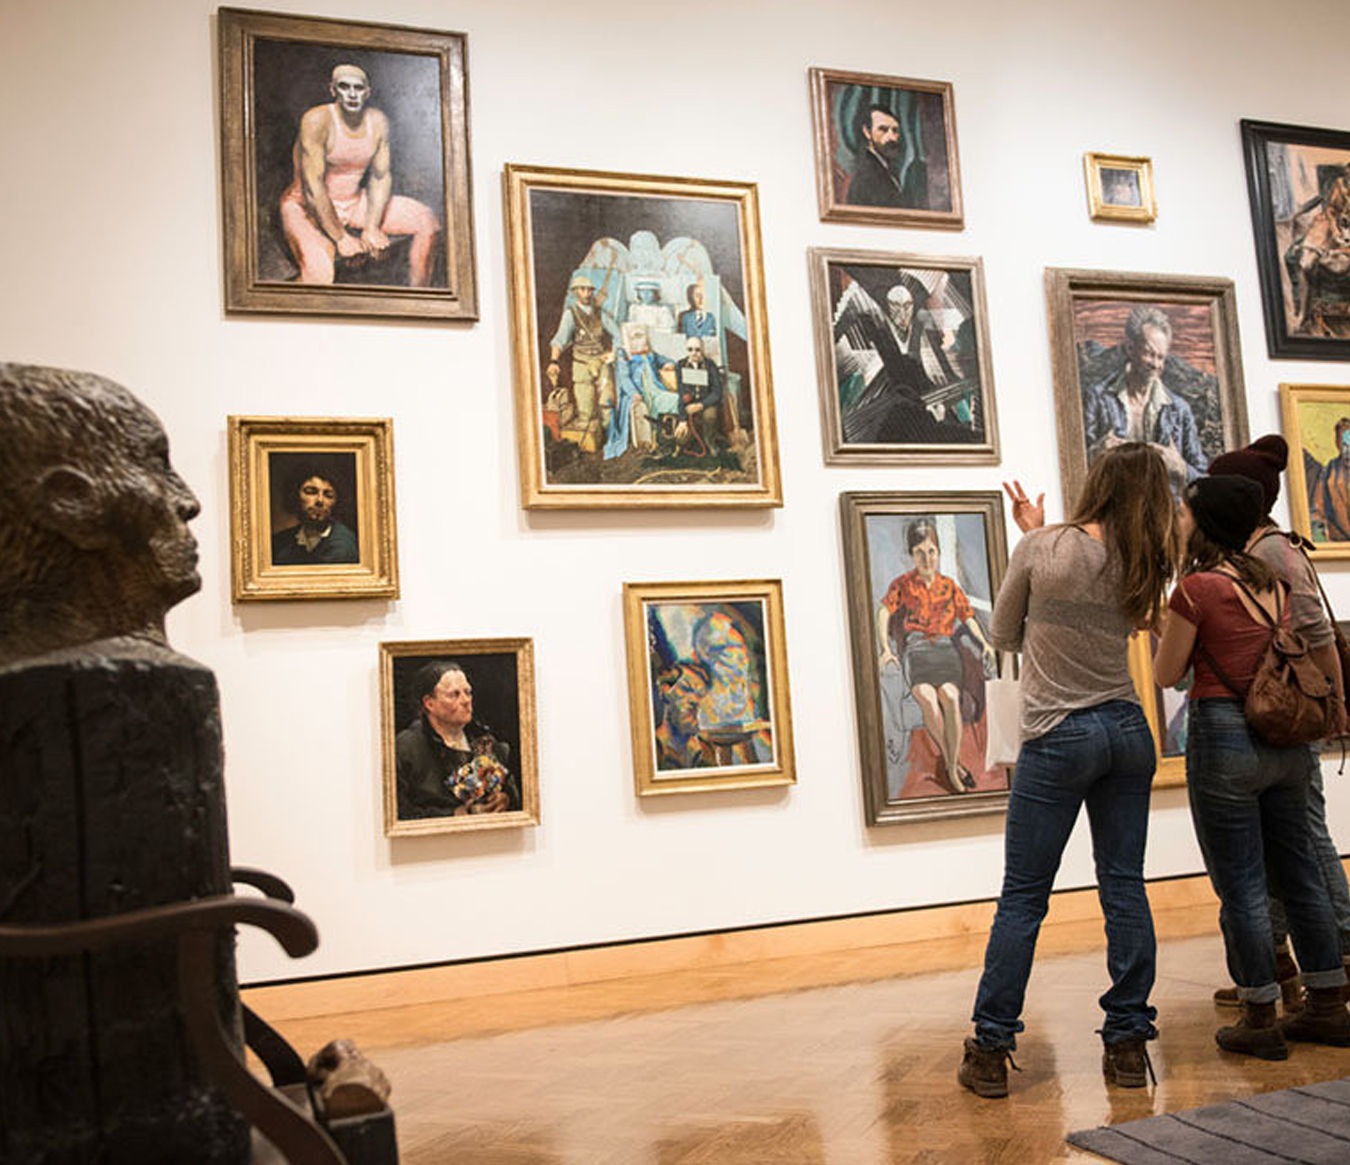 Things to Do in Minnesota - Minneapolis Institute of Art